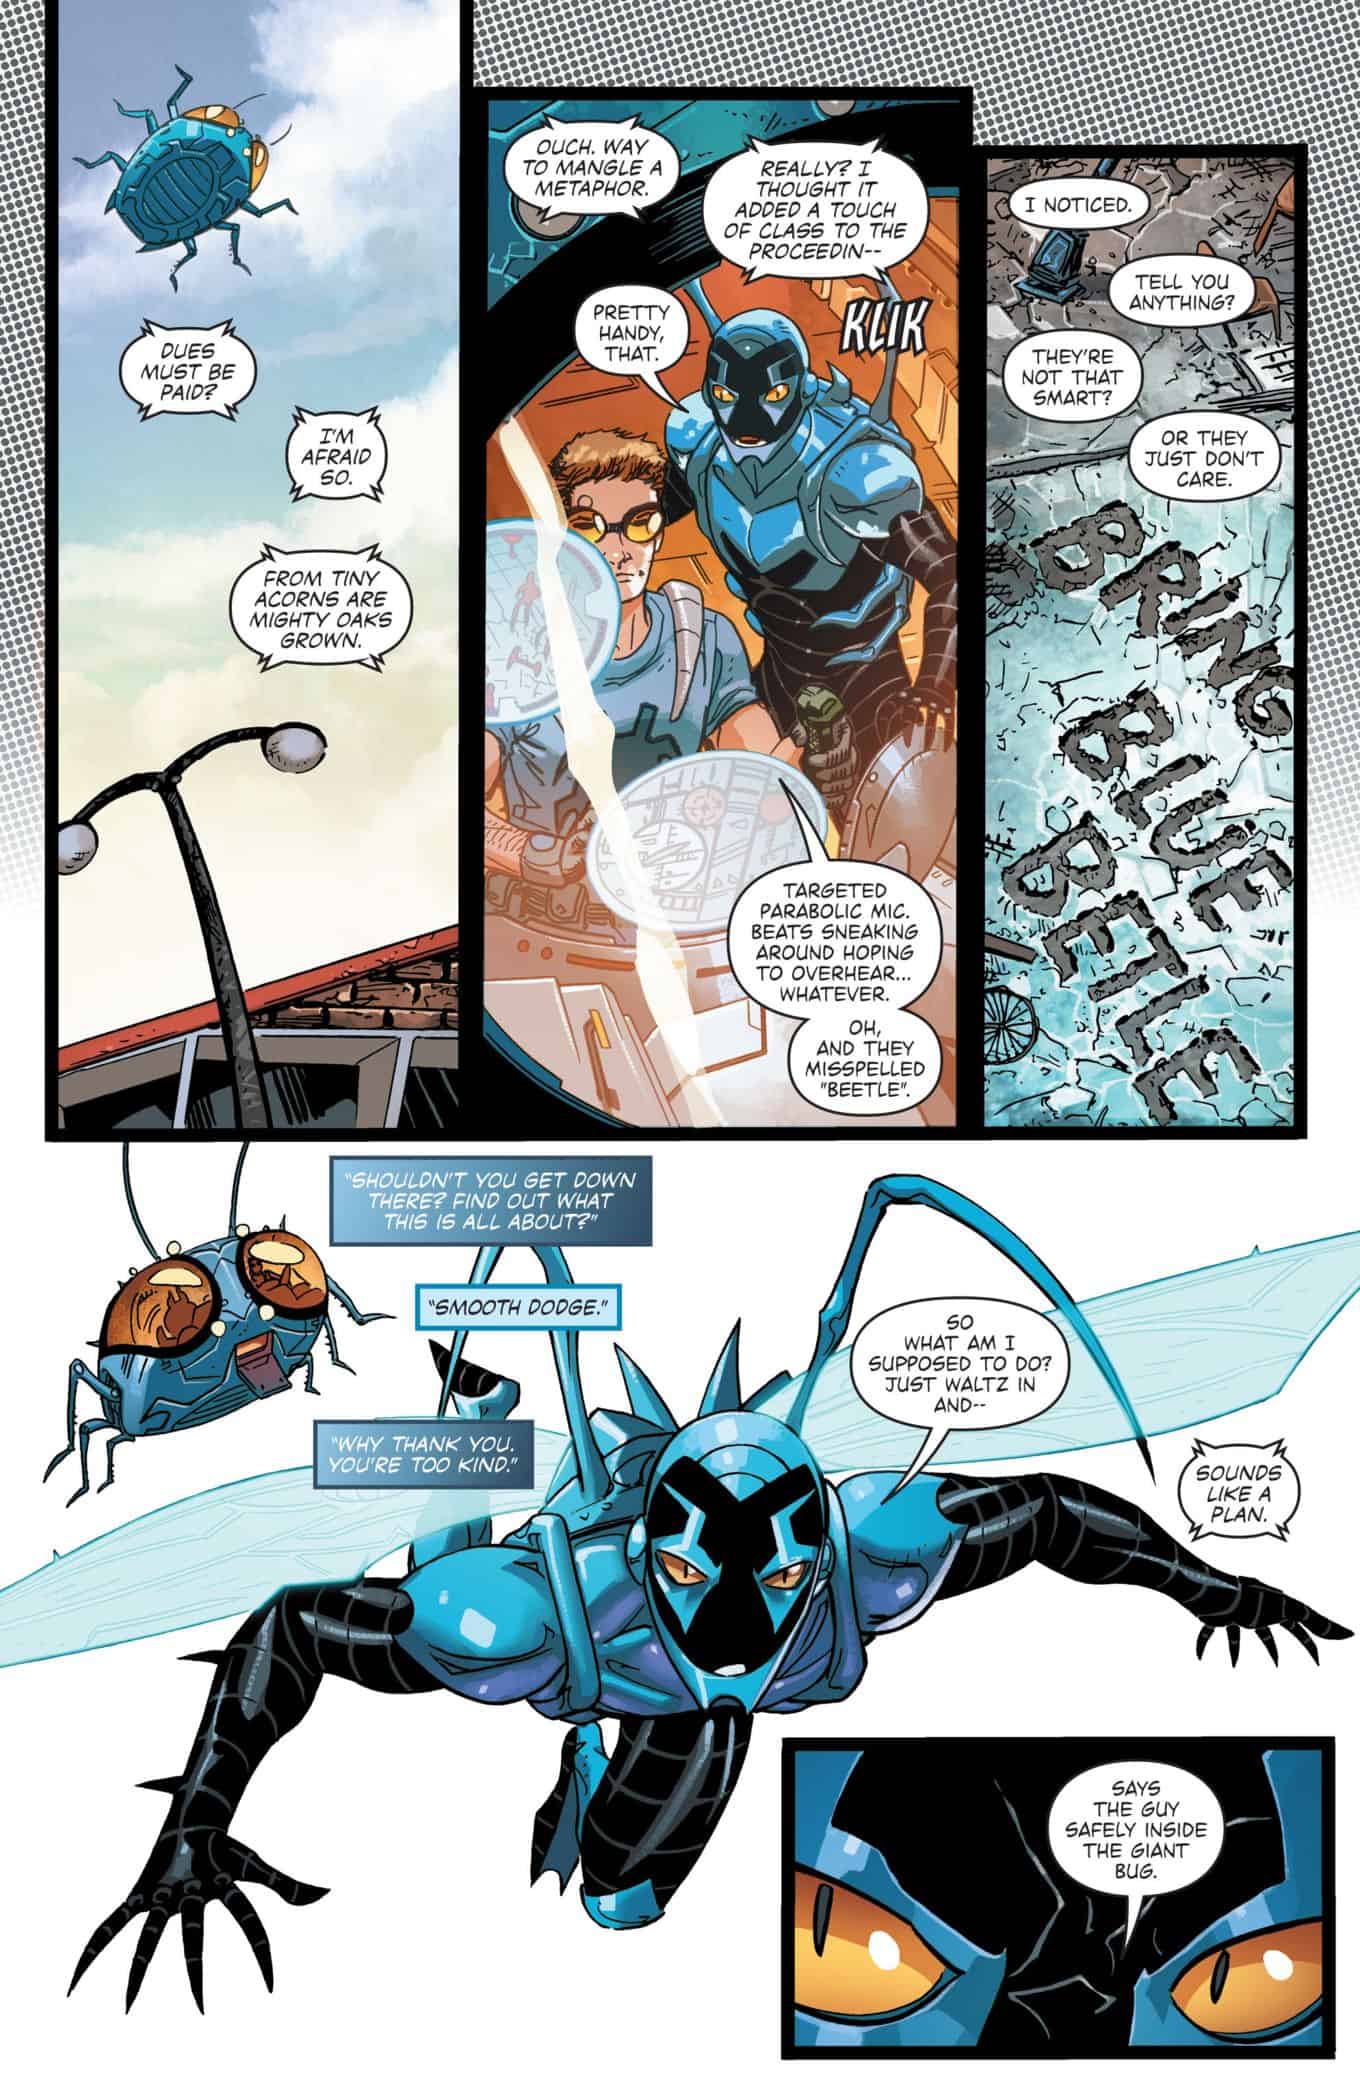 Dc Comics Rebirth Spoilers Review Dc Rebirth S Blue Beetle Rebirth 1 Explains Batman Beyond Relationship Of Ted Kord Jaime Reyes Plus Sets Up New Ally Villain Inside Pulse